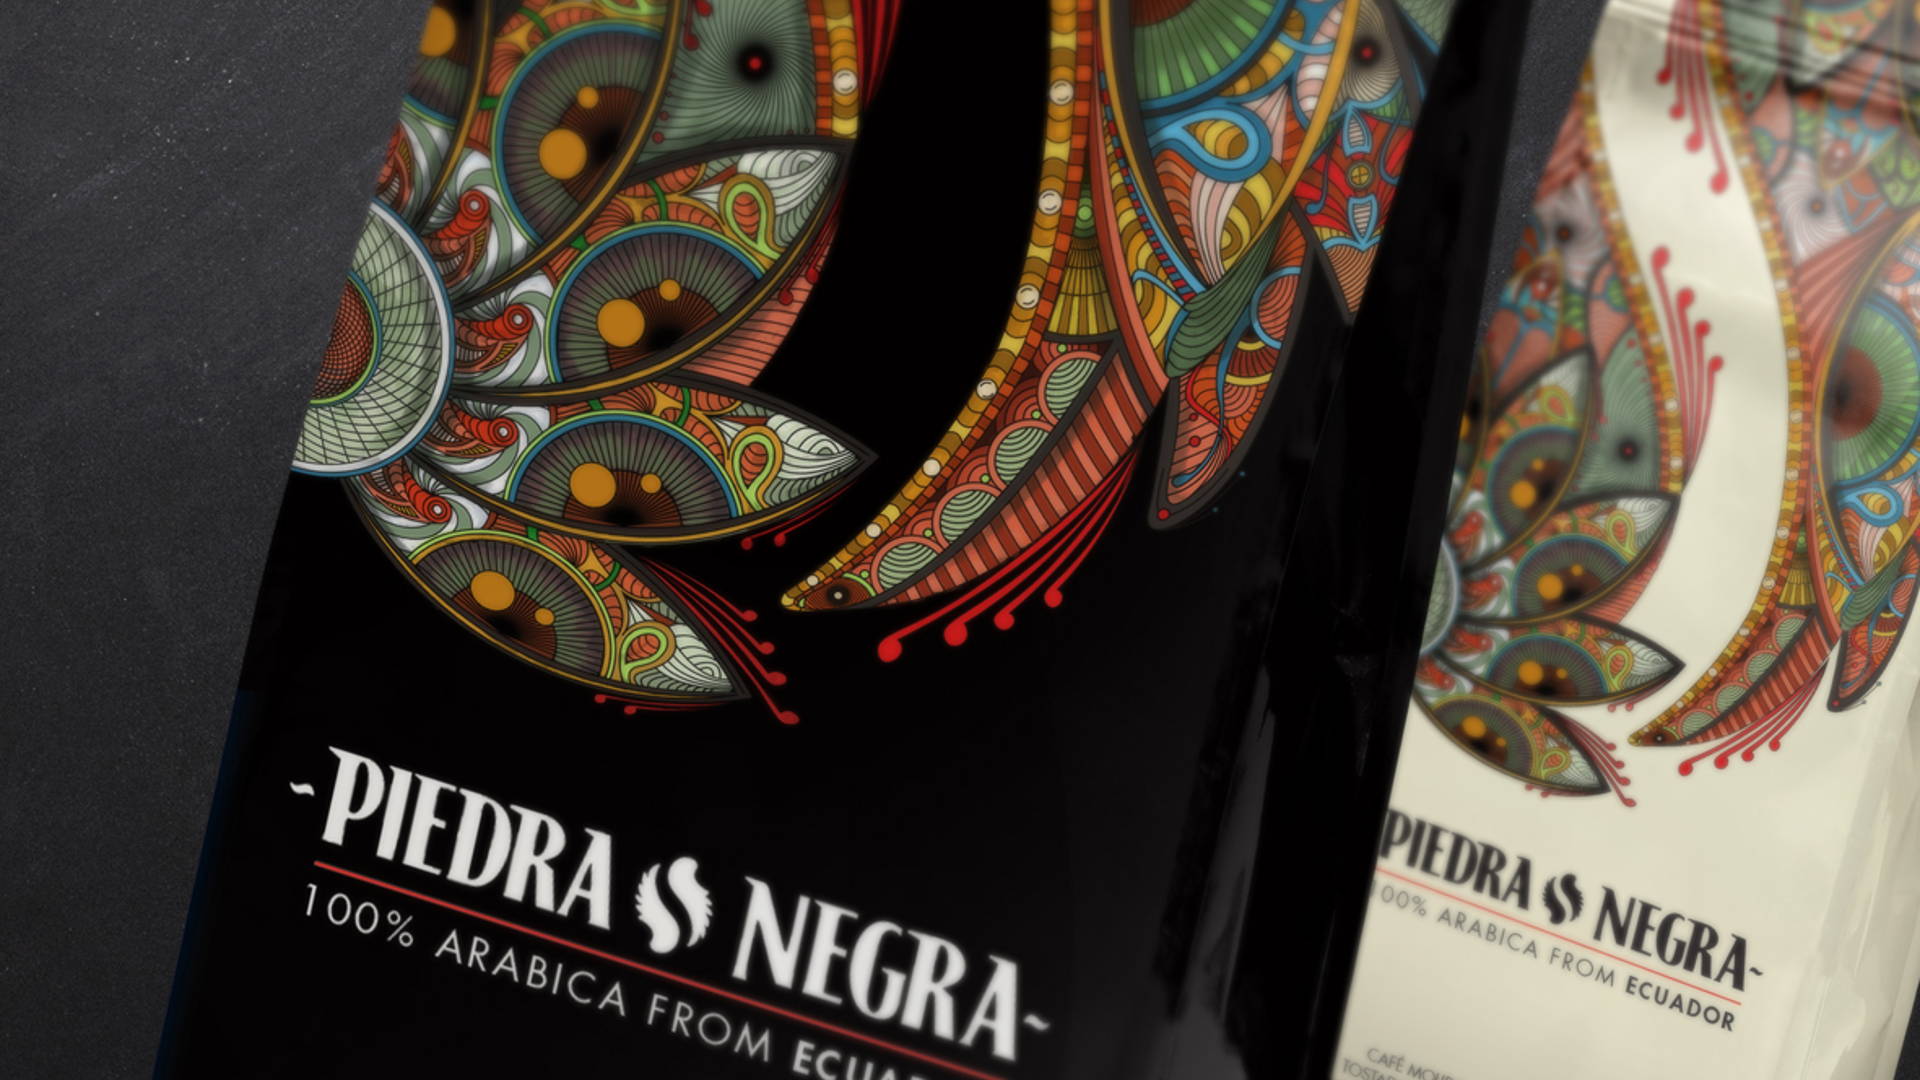 Featured image for Piedra Negra 